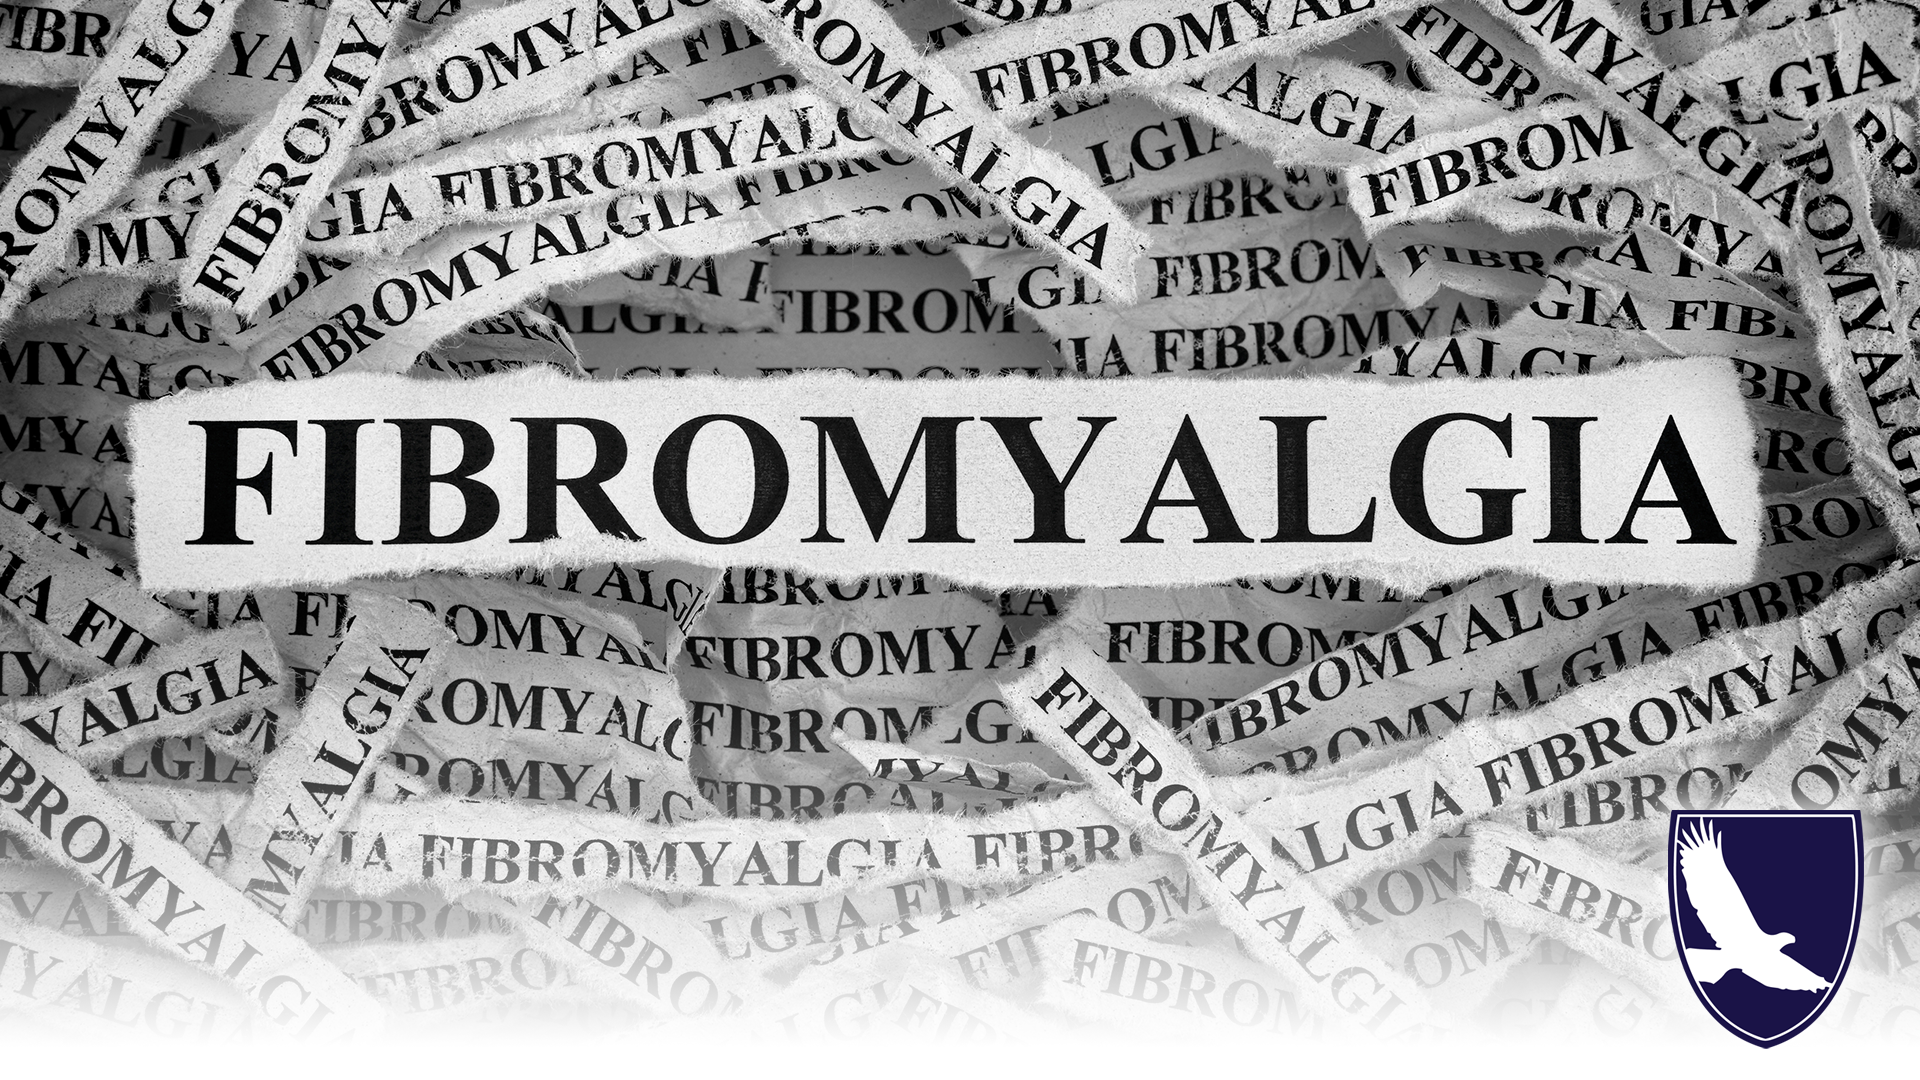 CAN I GET SOCIAL SECURITY DISABILITY SSDI FOR FIBROMYALGIA